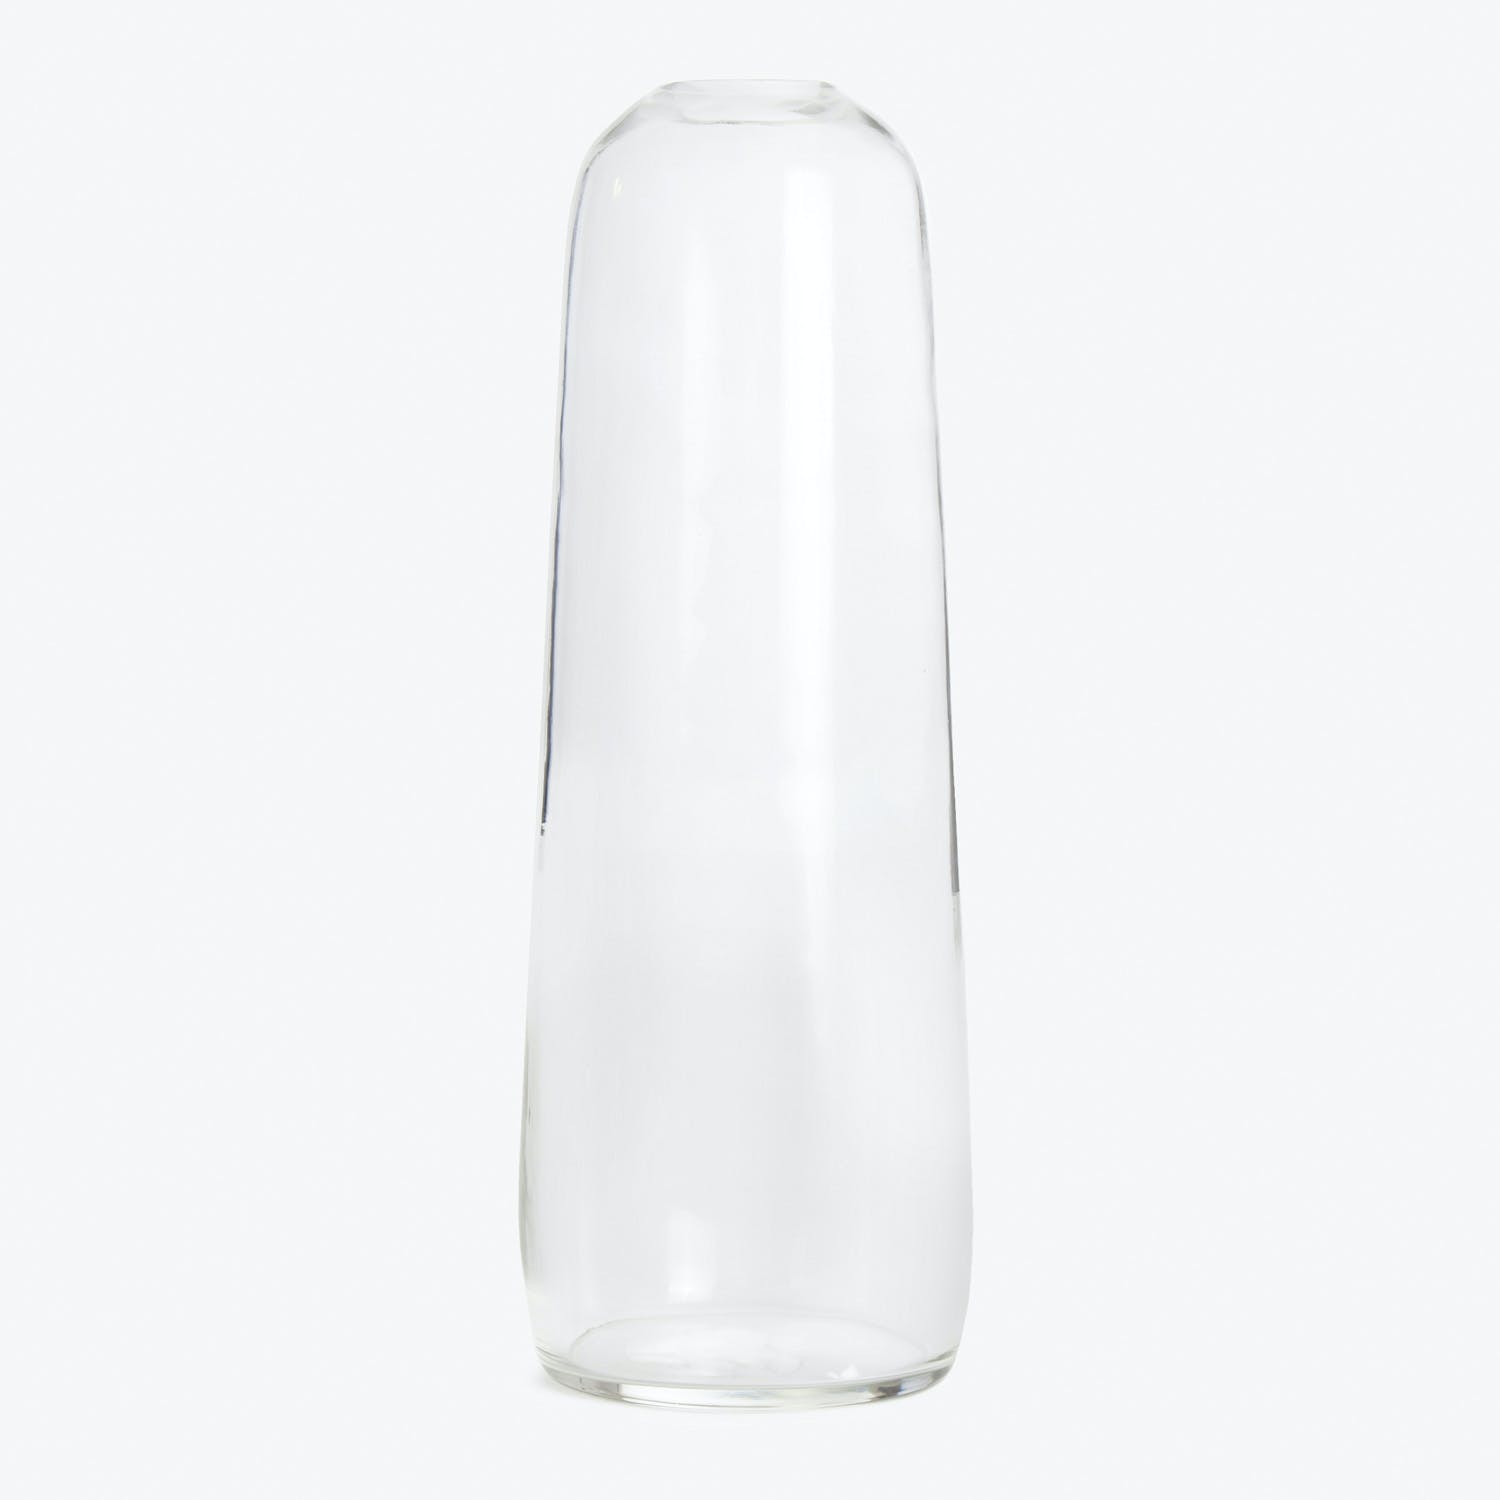 Minimalist clear glass cylinder on a white background.